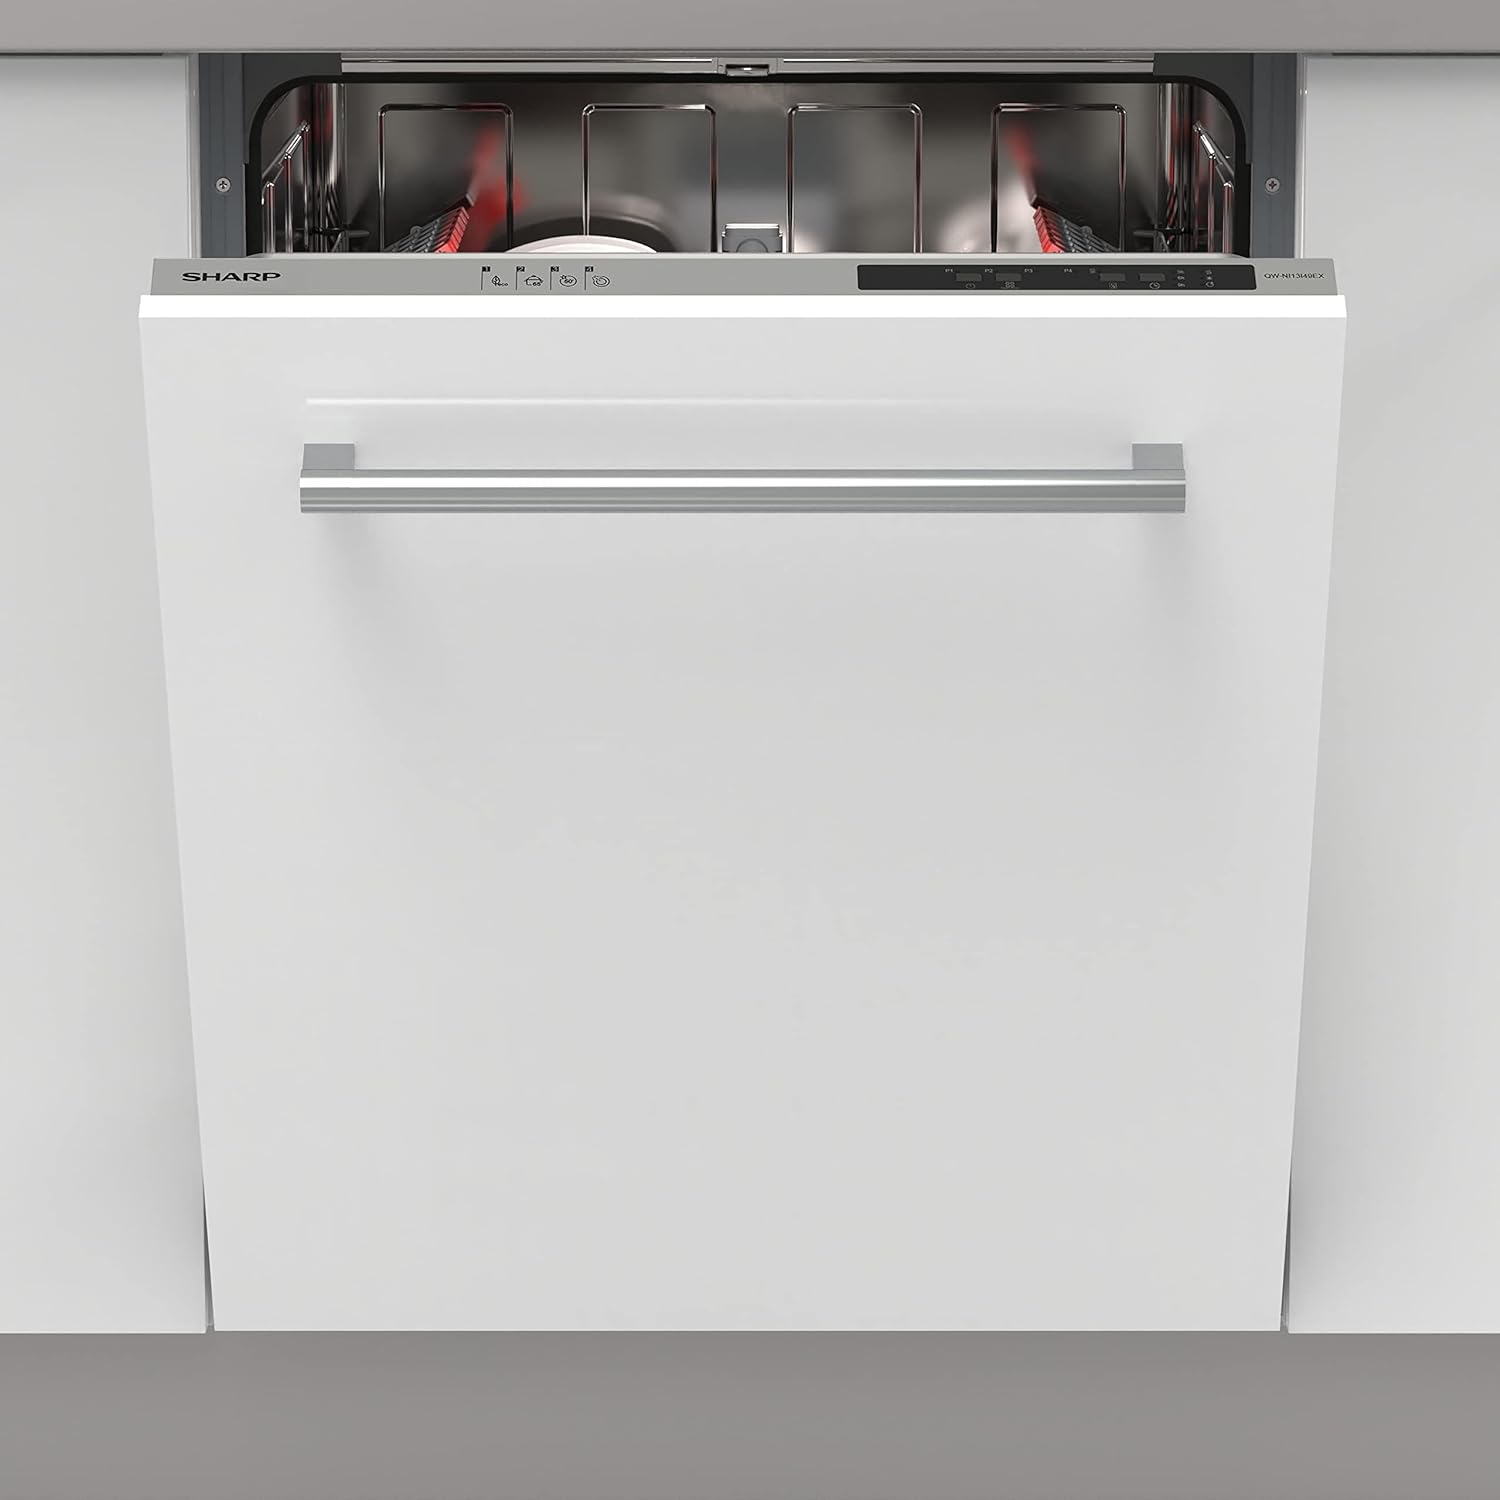 SHARP QW - NI13I49EX - EN Fully Integrated Standard Dishwasher - Silver Control Panel - E Rated - Amazing Gadgets Outlet